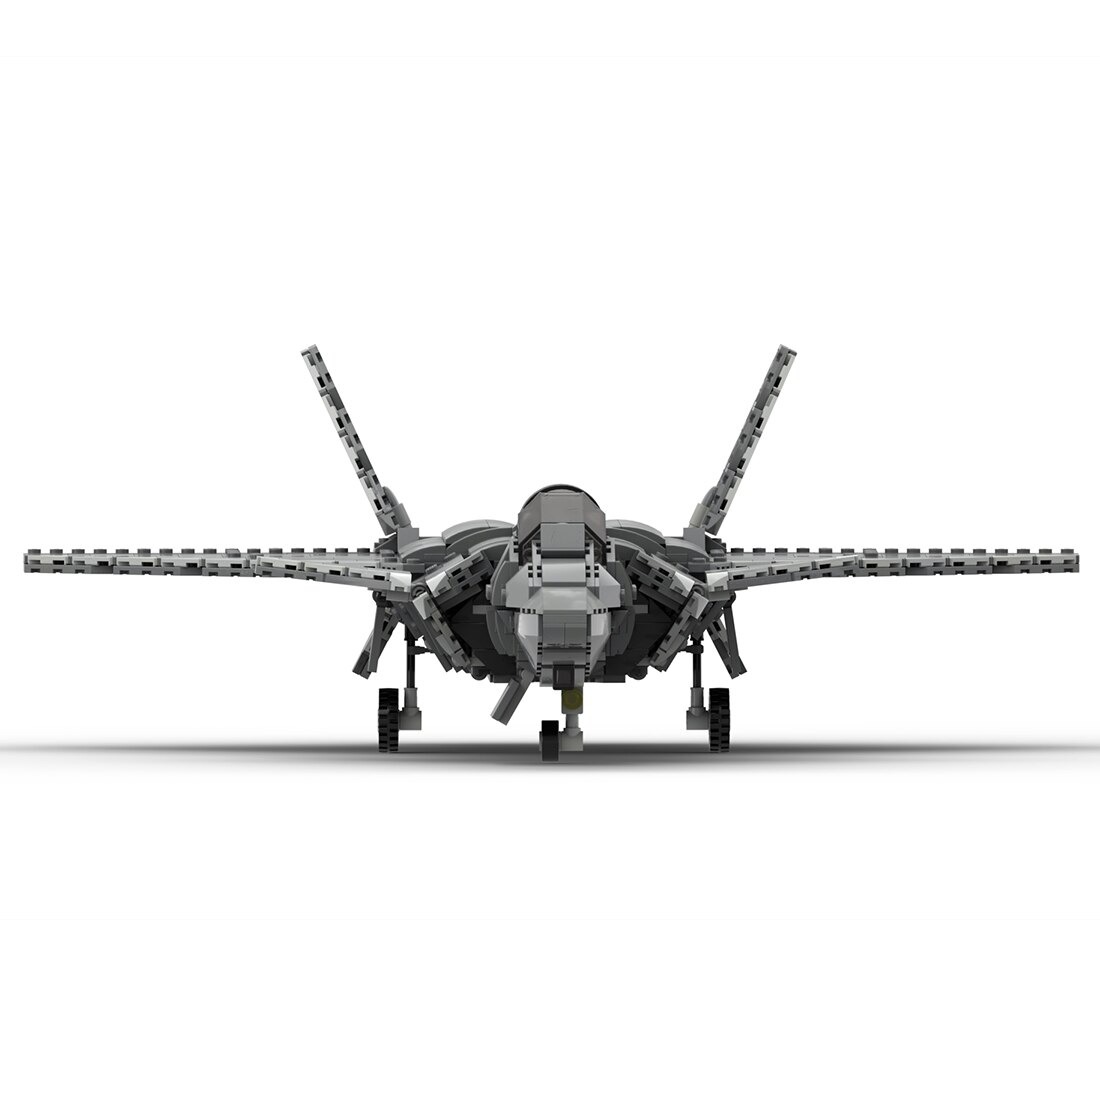 authorized moc 64706 j 20 stealth fighte main 1 - DECOOL